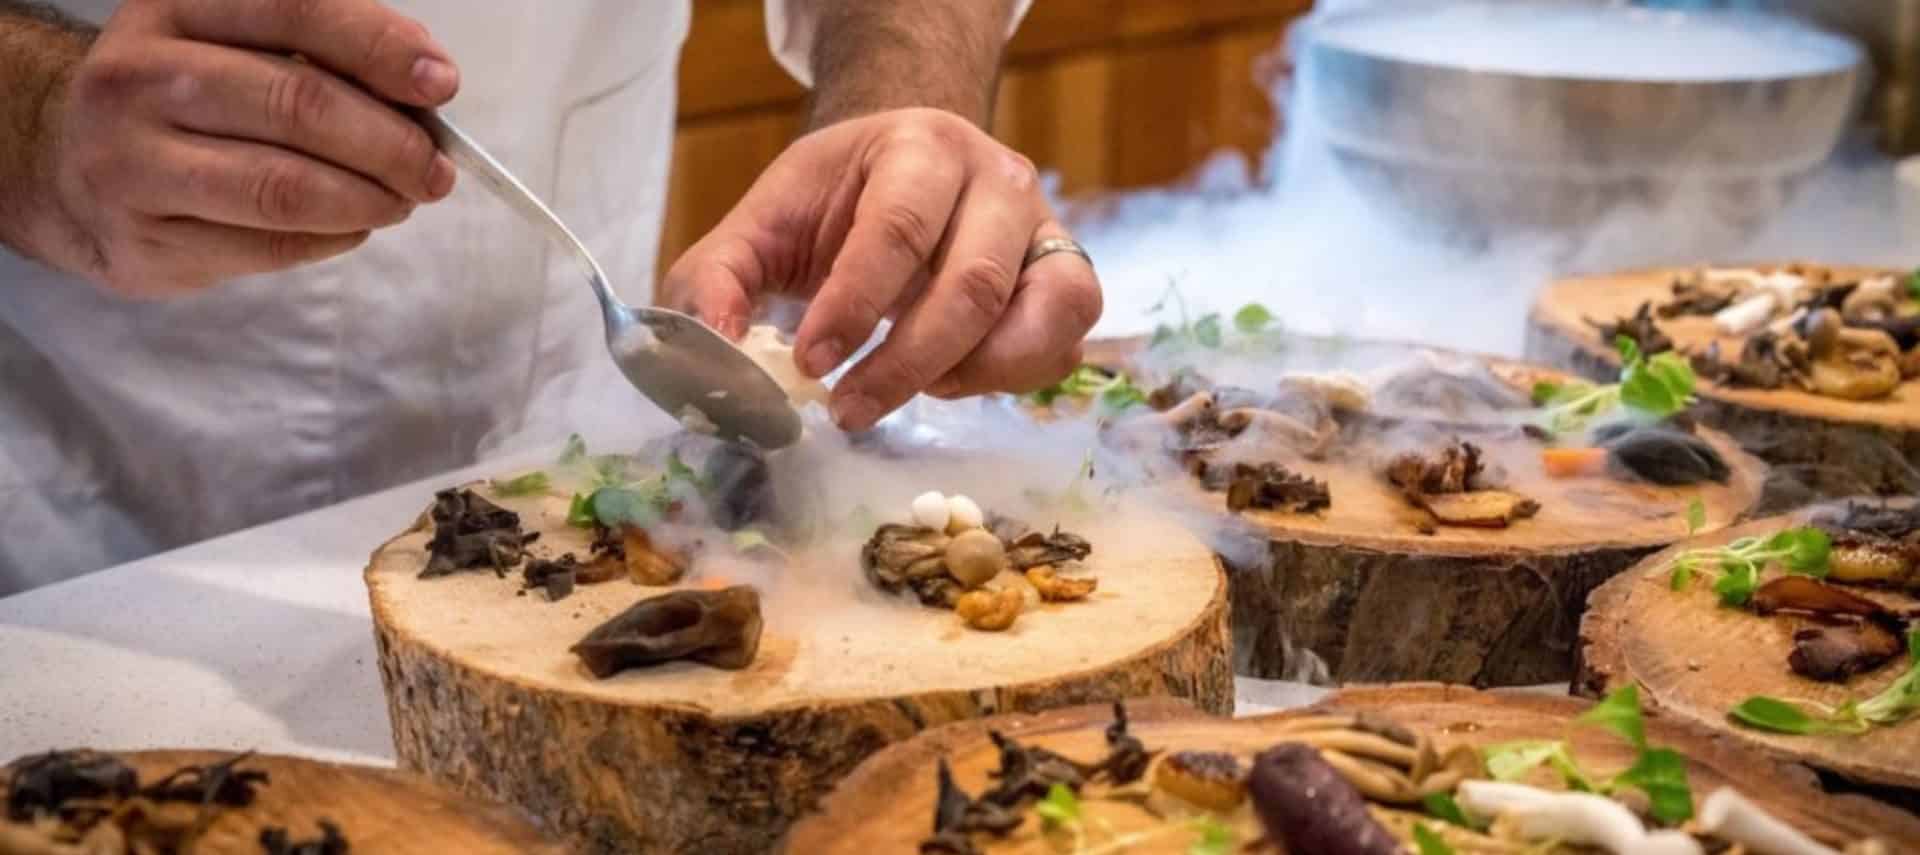 Man's hands finishing appetizer on rustic log